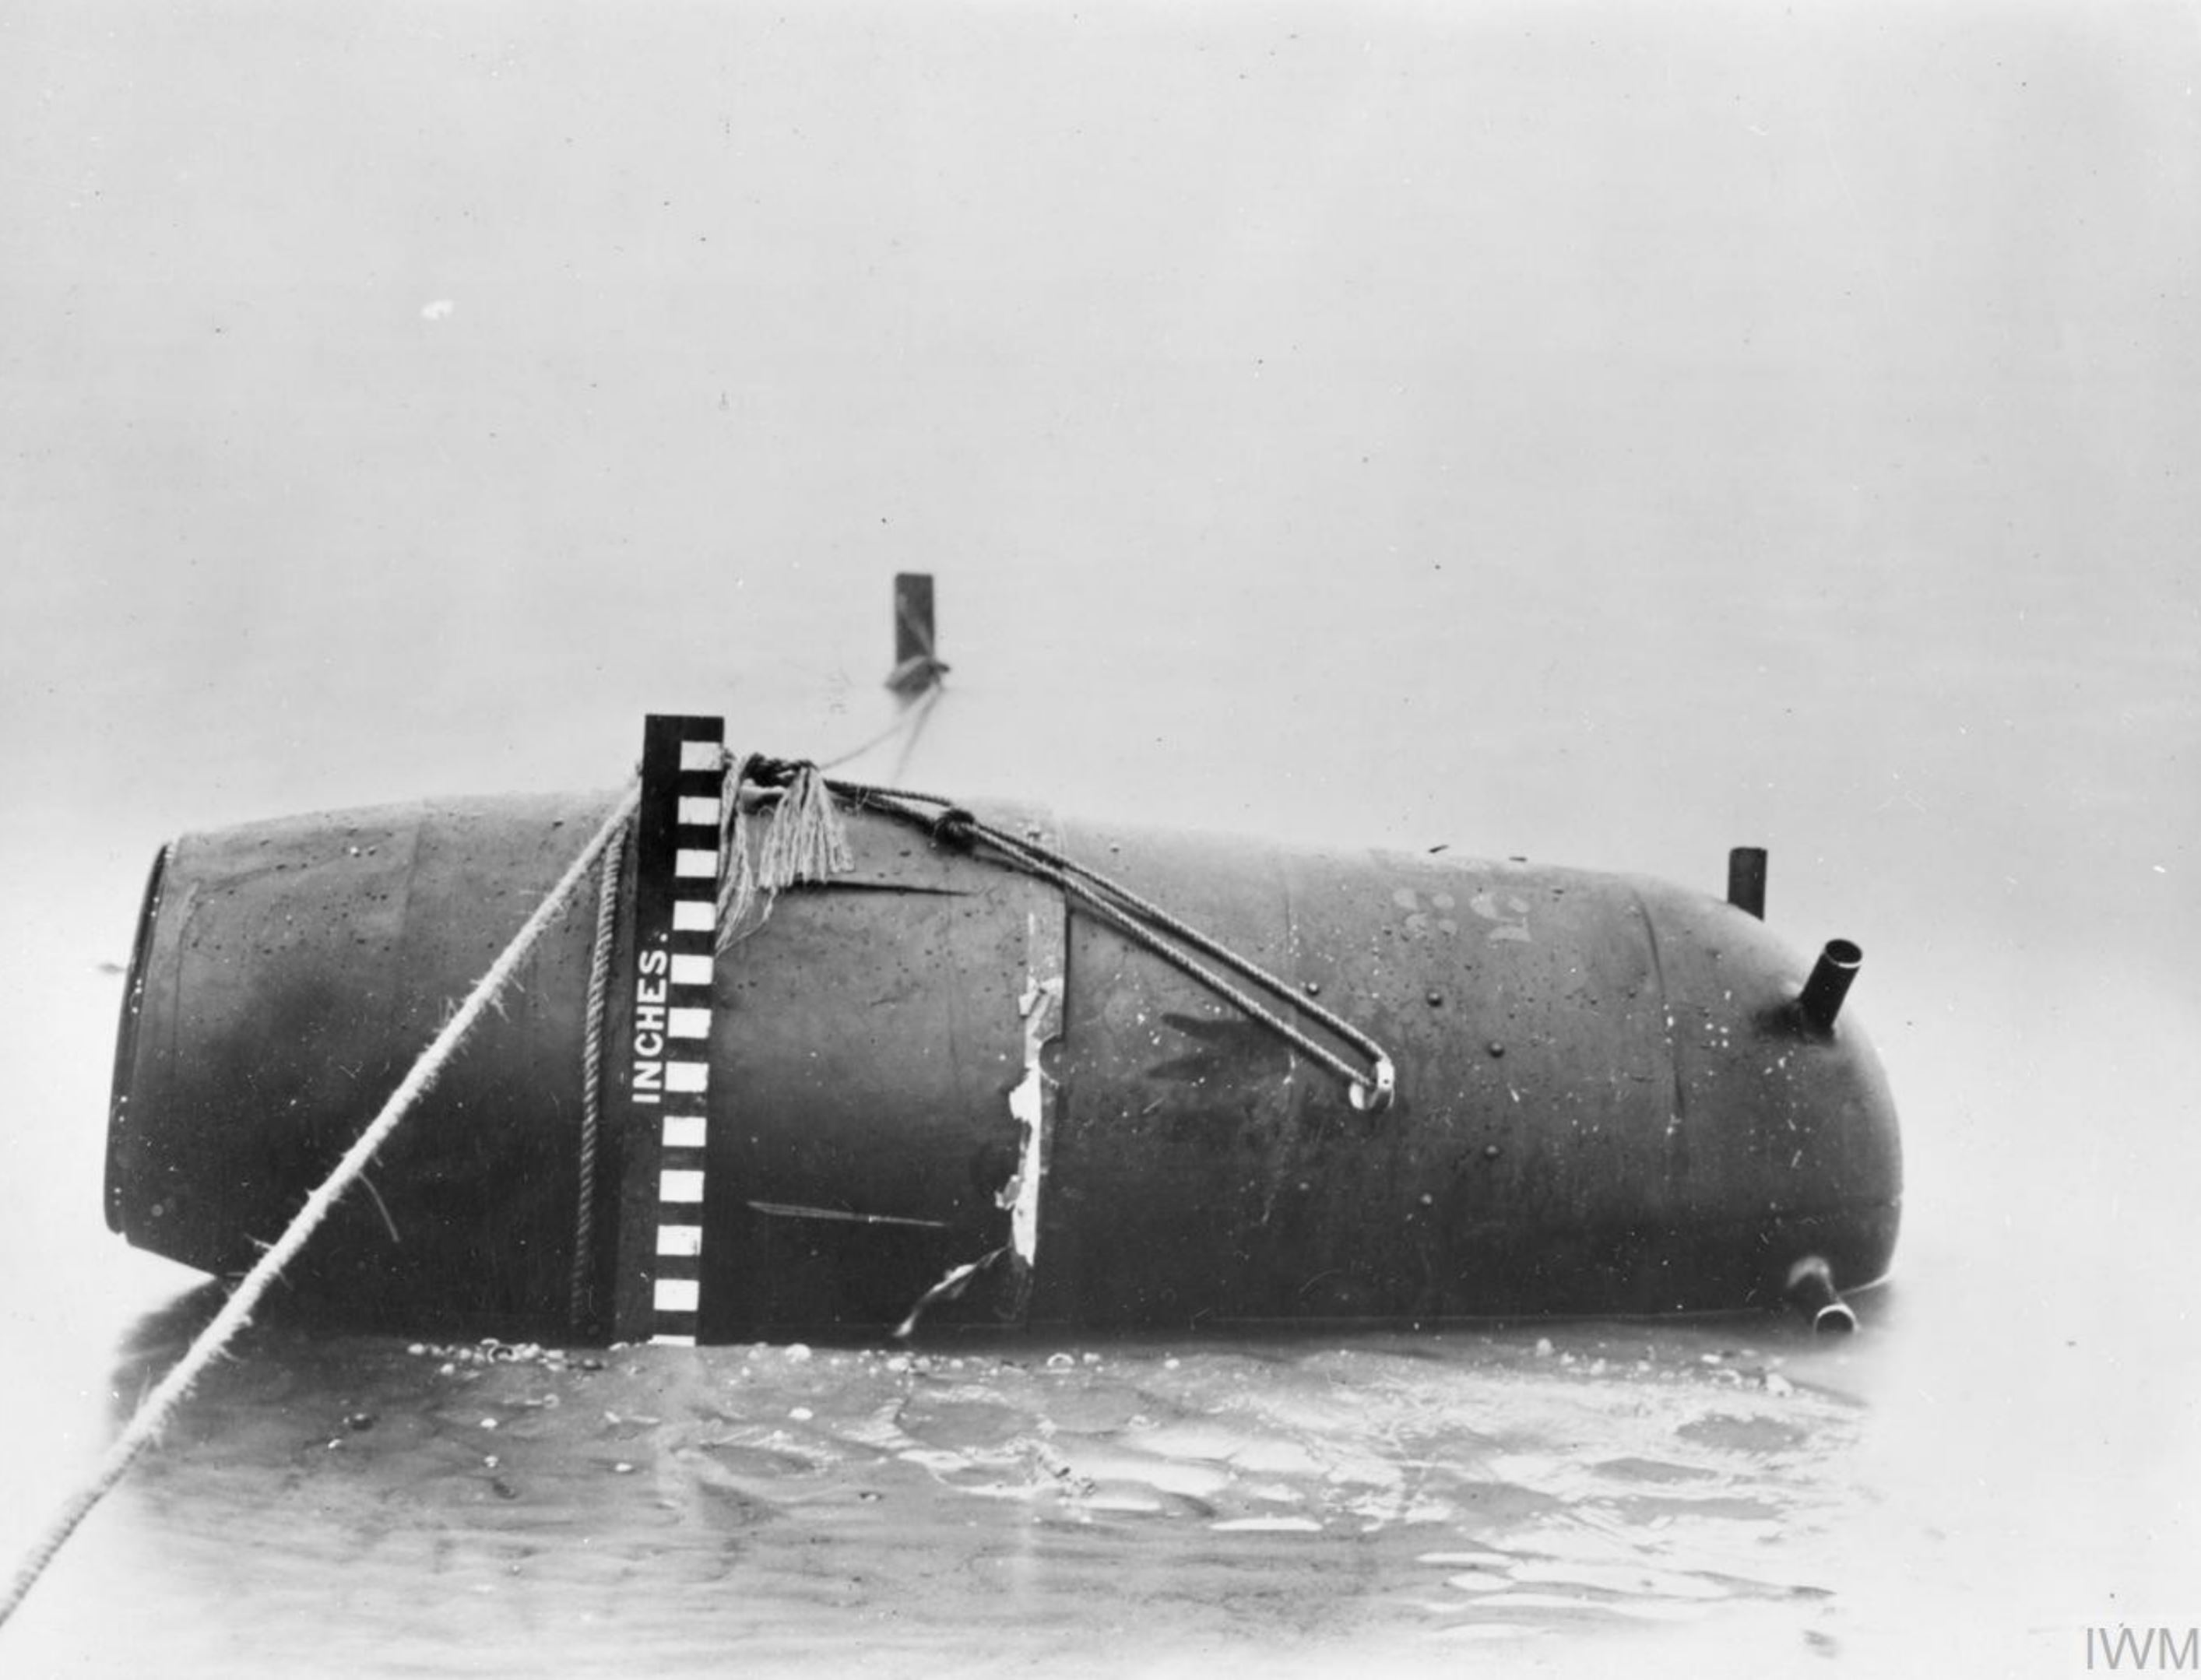 German magnetic mine recovered in 1939 IWM A30292